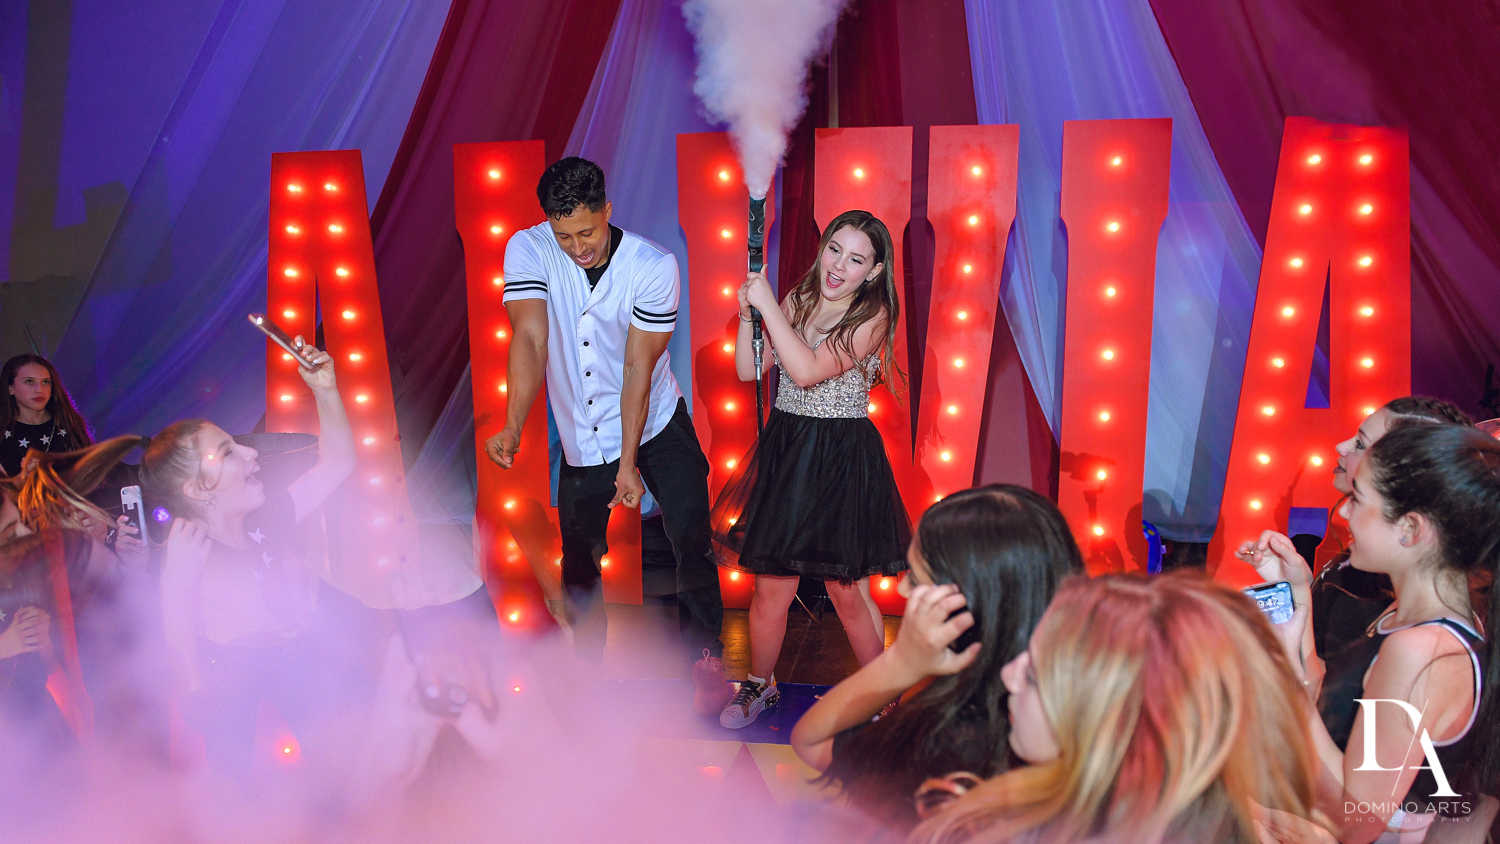 smoke effects at The Greatest Showman theme Bat Mitzvah at the filmore miami by Domino Arts Photography